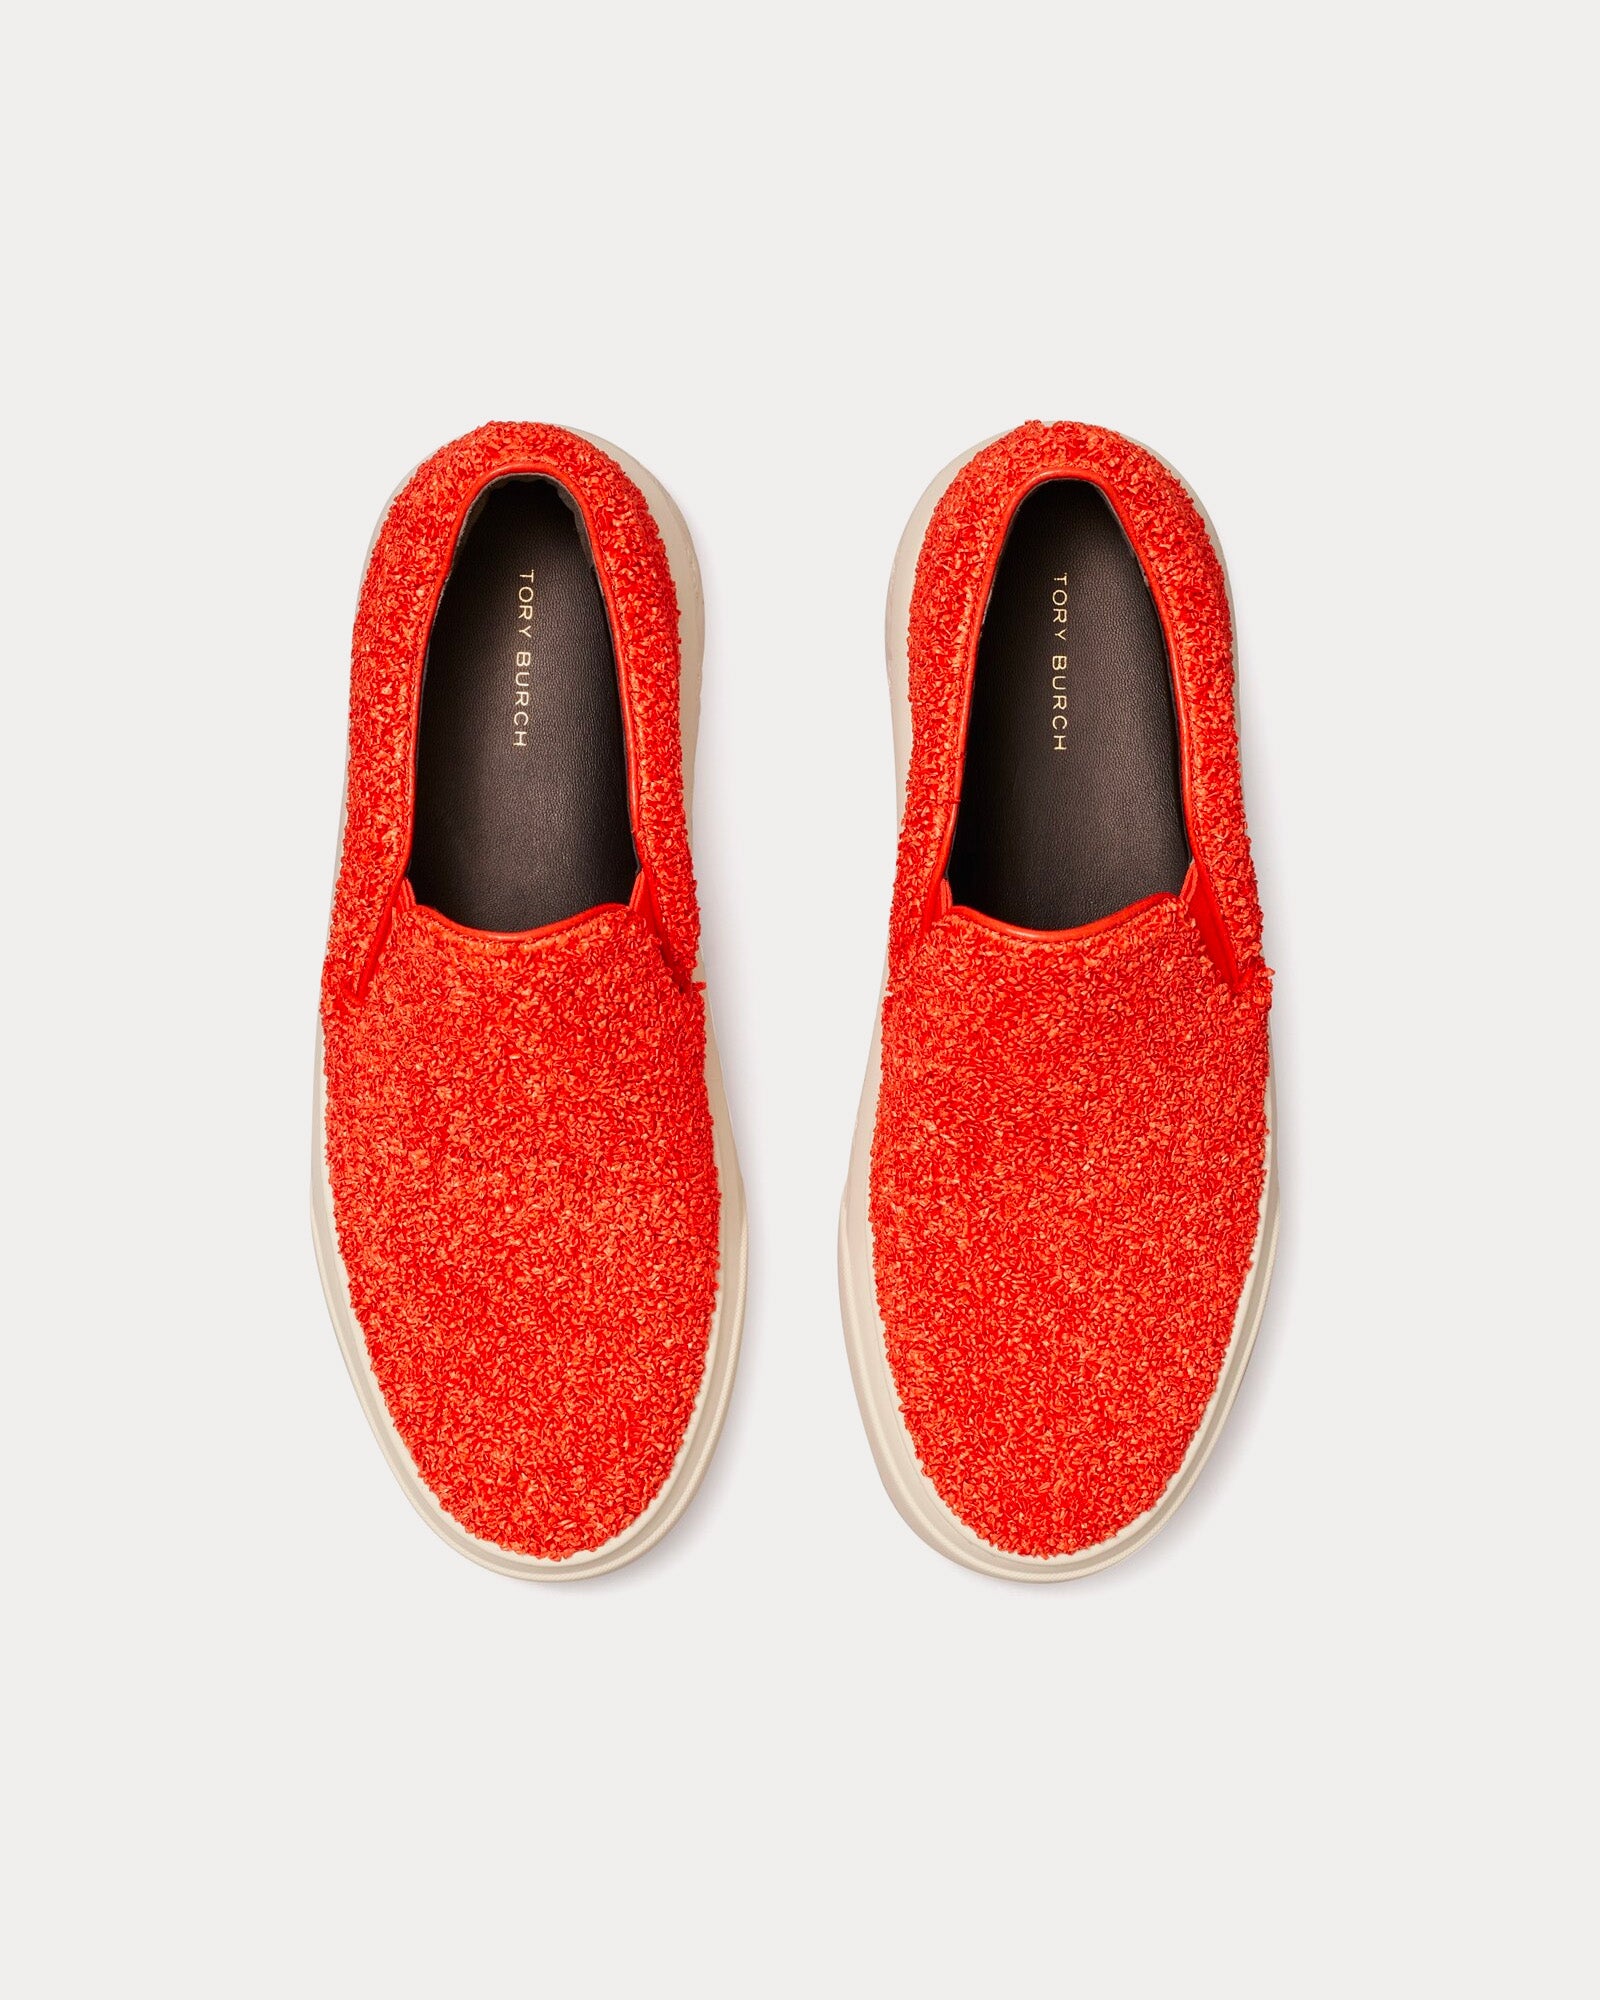 Tory Burch - Ladybug Raffia & Leather Piper Red Slip On Sneakers